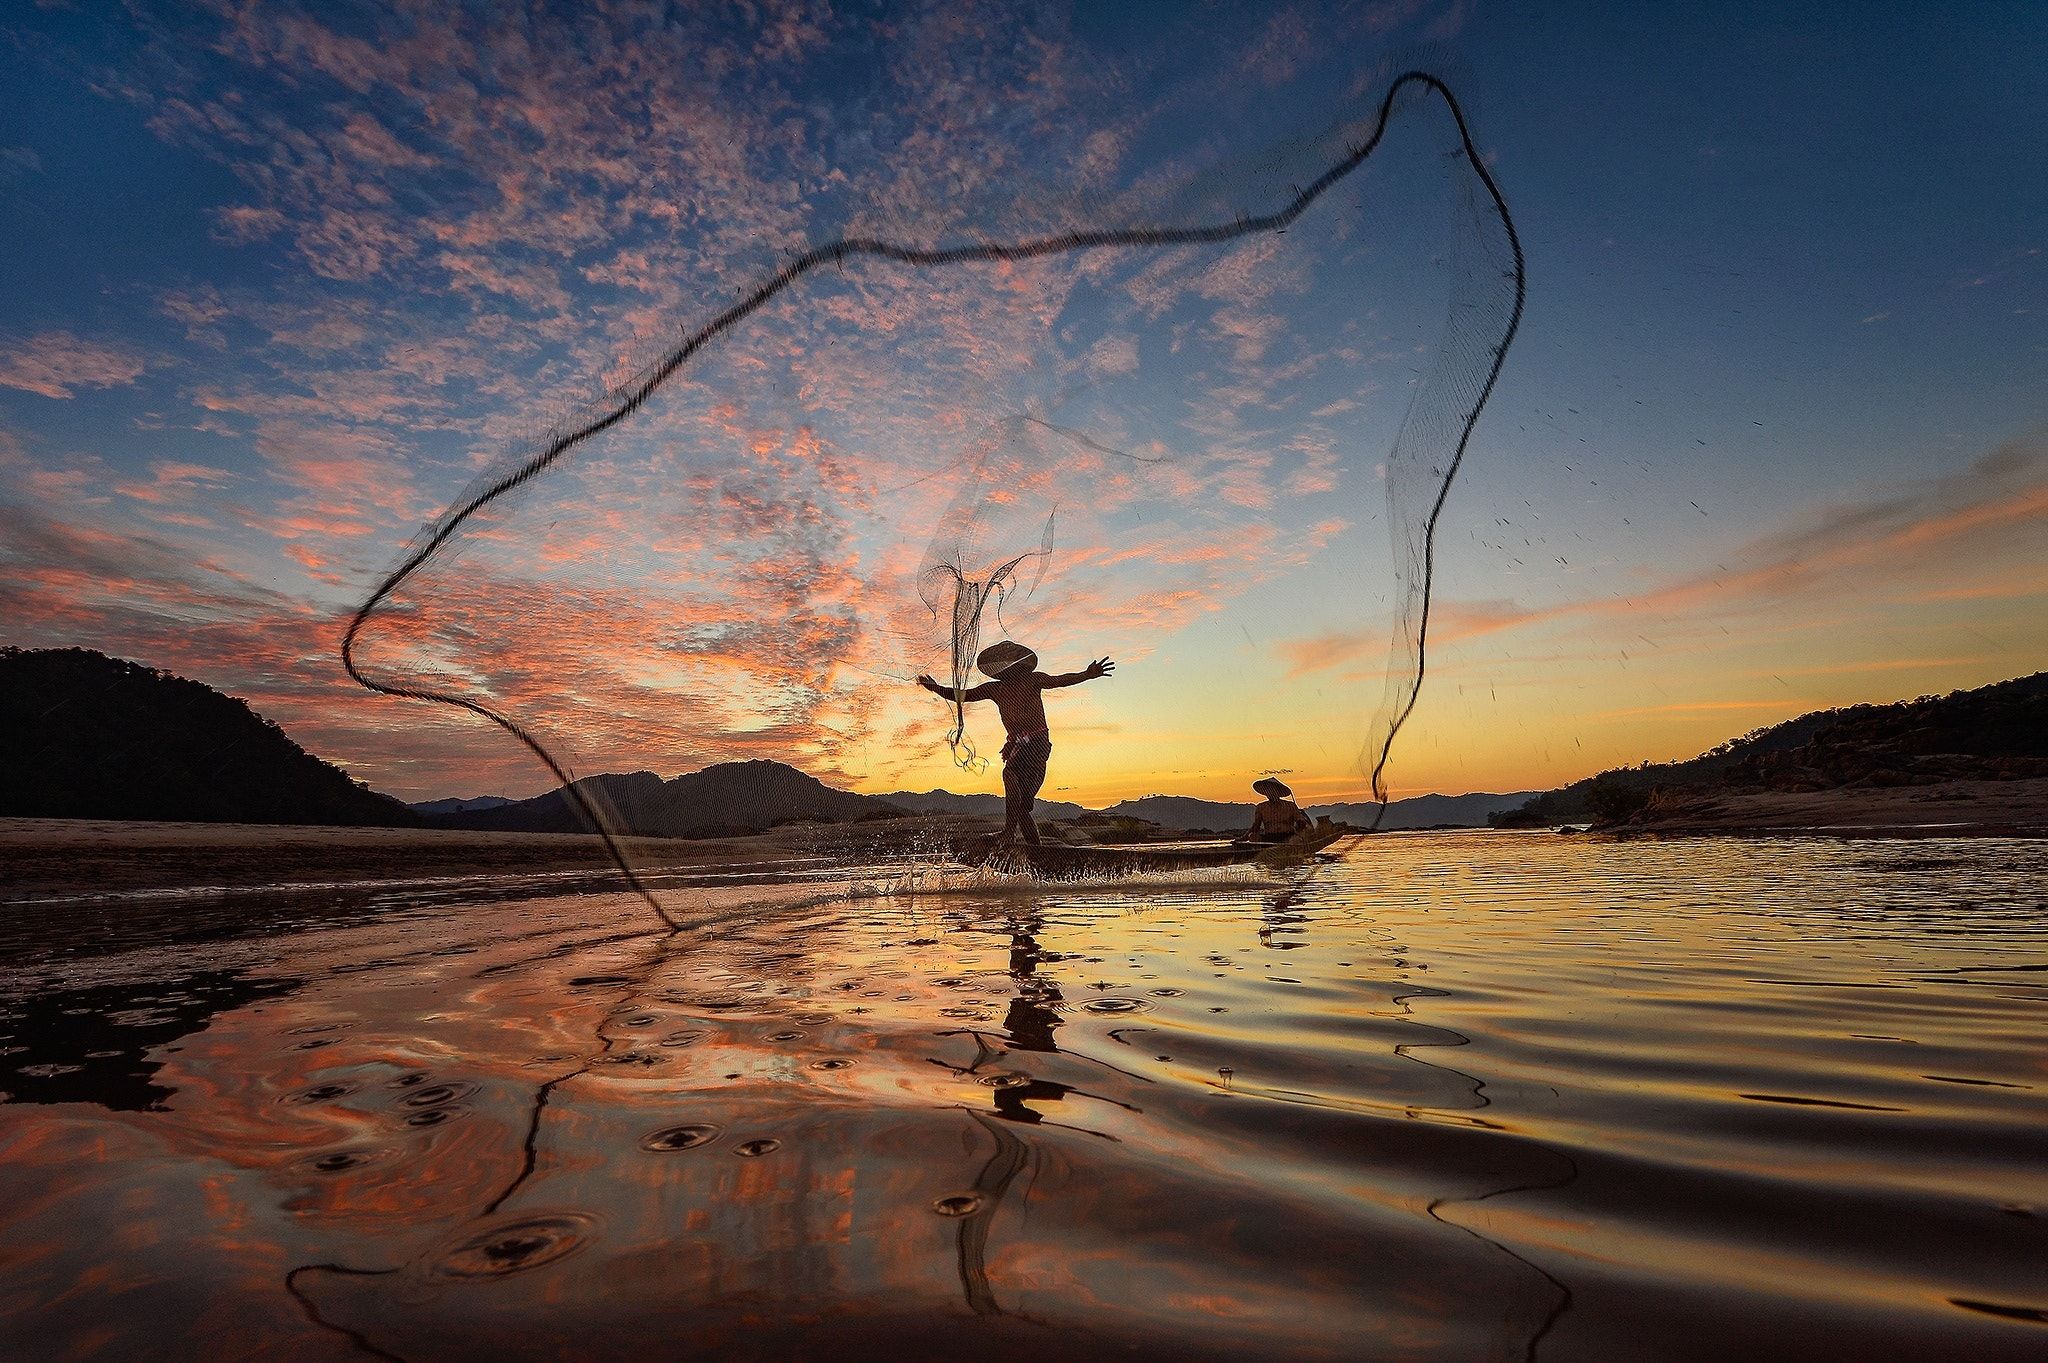 The nets,Thailand - Silluate fisherman and boat in river on during ...